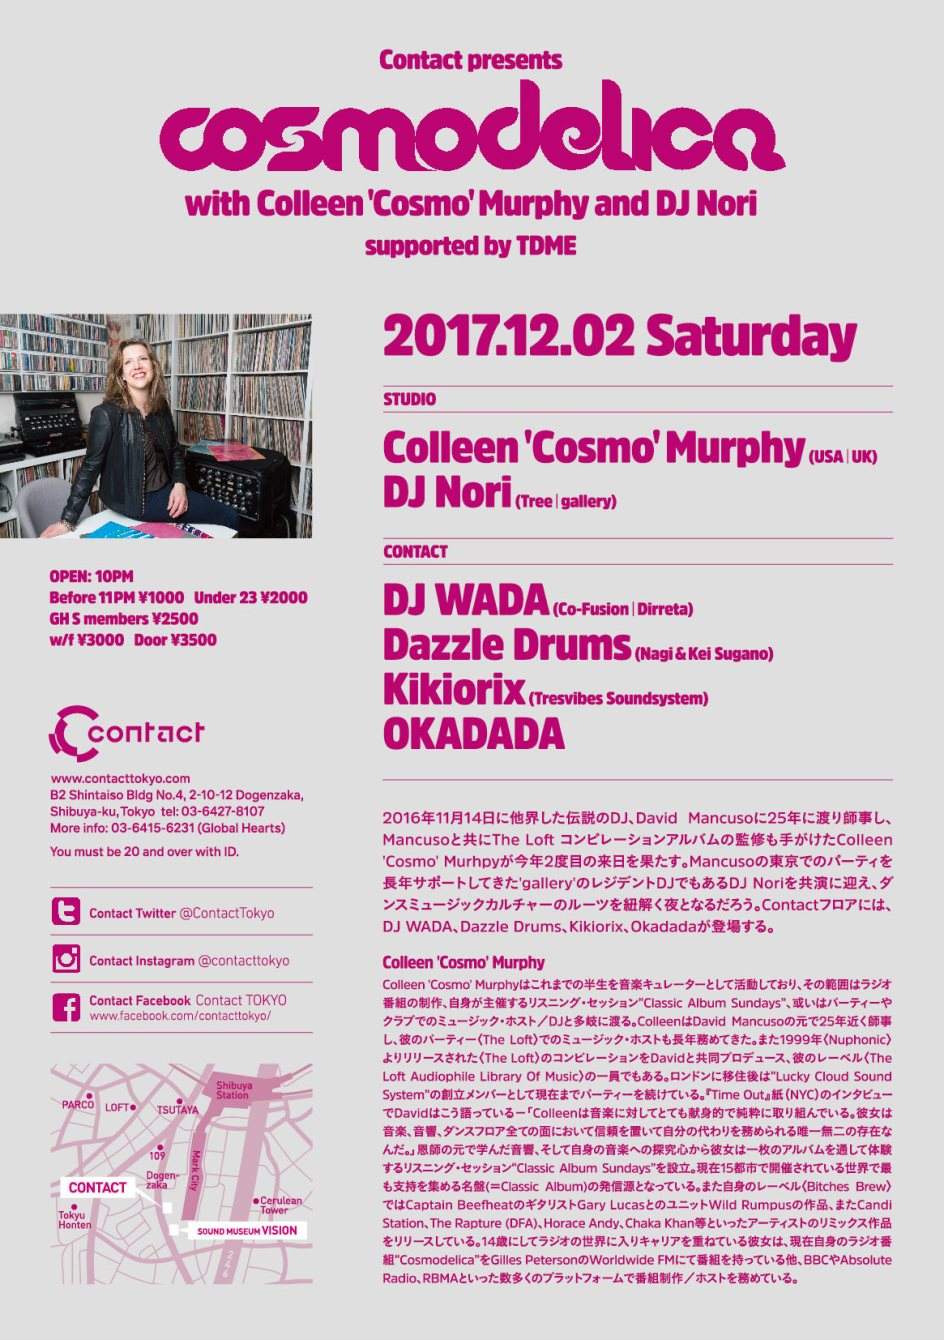 Contact presents Cosmodelica with Colleen 'Cosmo' Murphy and DJ Nori Supported by Tdme - フライヤー裏